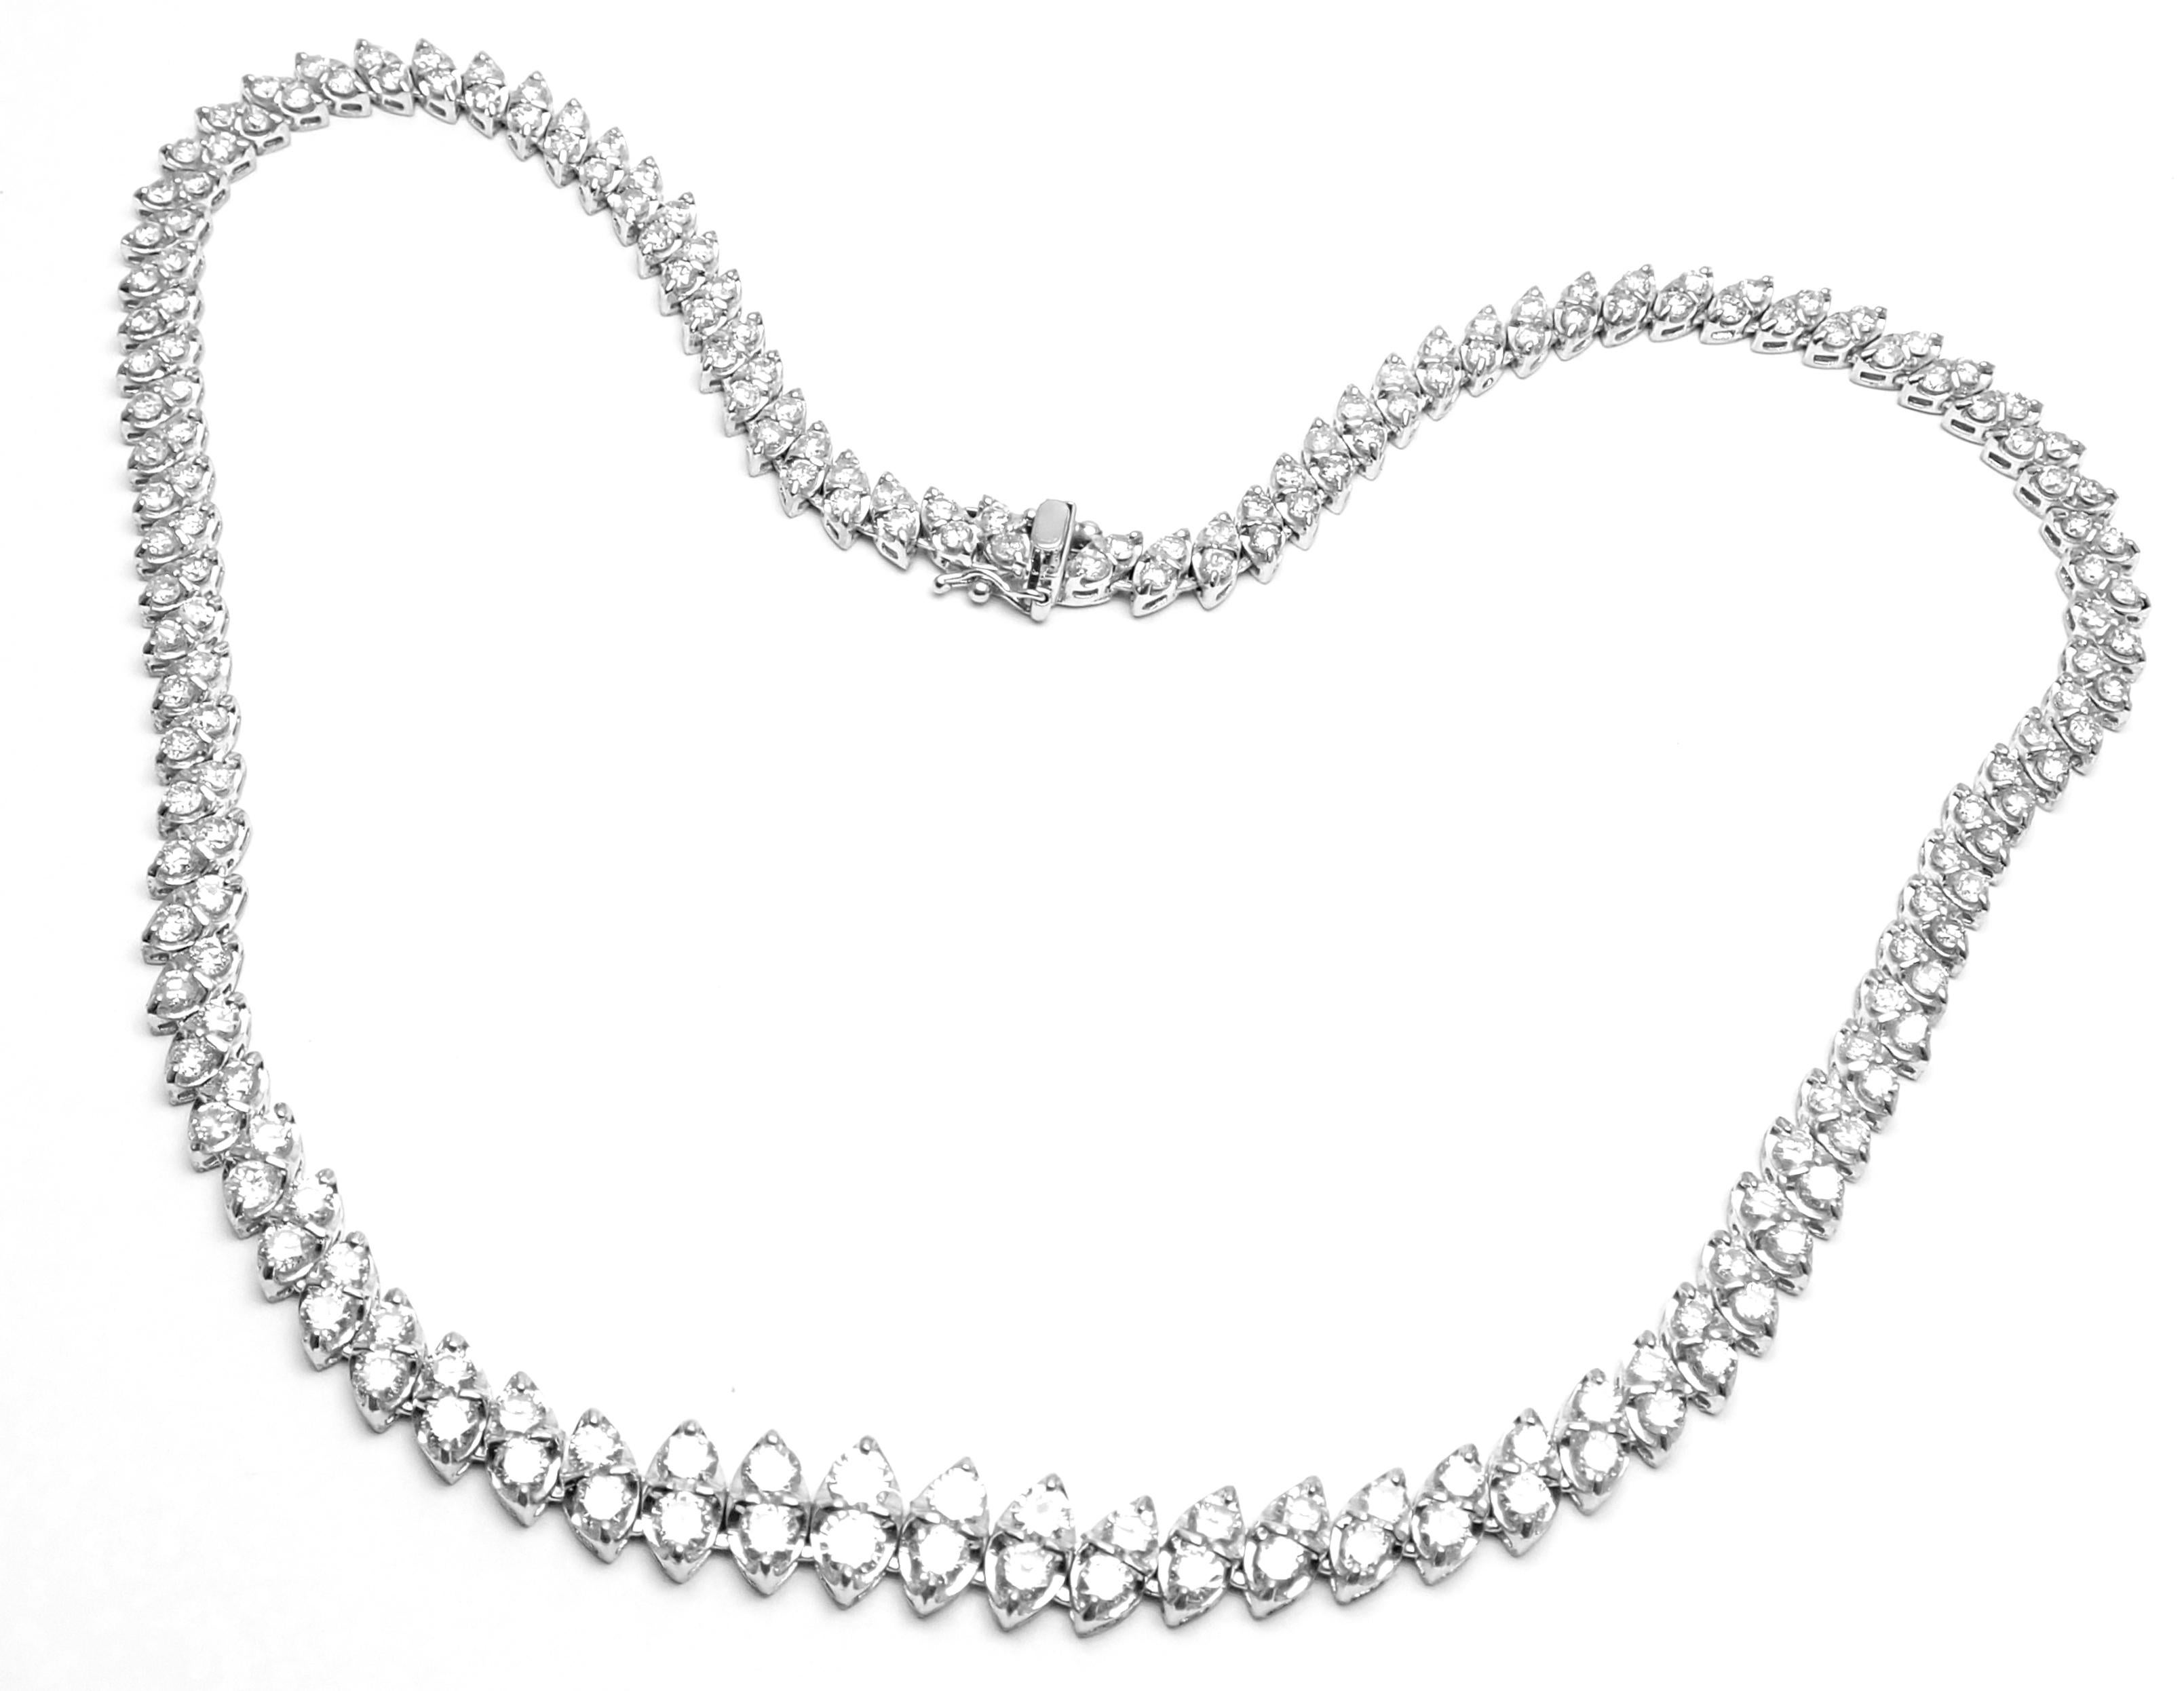 Estate Platinum 14ct Diamond Necklace.
With 242 round brilliant cut diamonds SI1 - SI2 clarity, I-J color total weight is approximately 14ct
Details:
Length: 17'' 
Width: 6mm
Weight:  42.4 grams
Stamped Hallmarks: Pt850
*Free Shipping within the